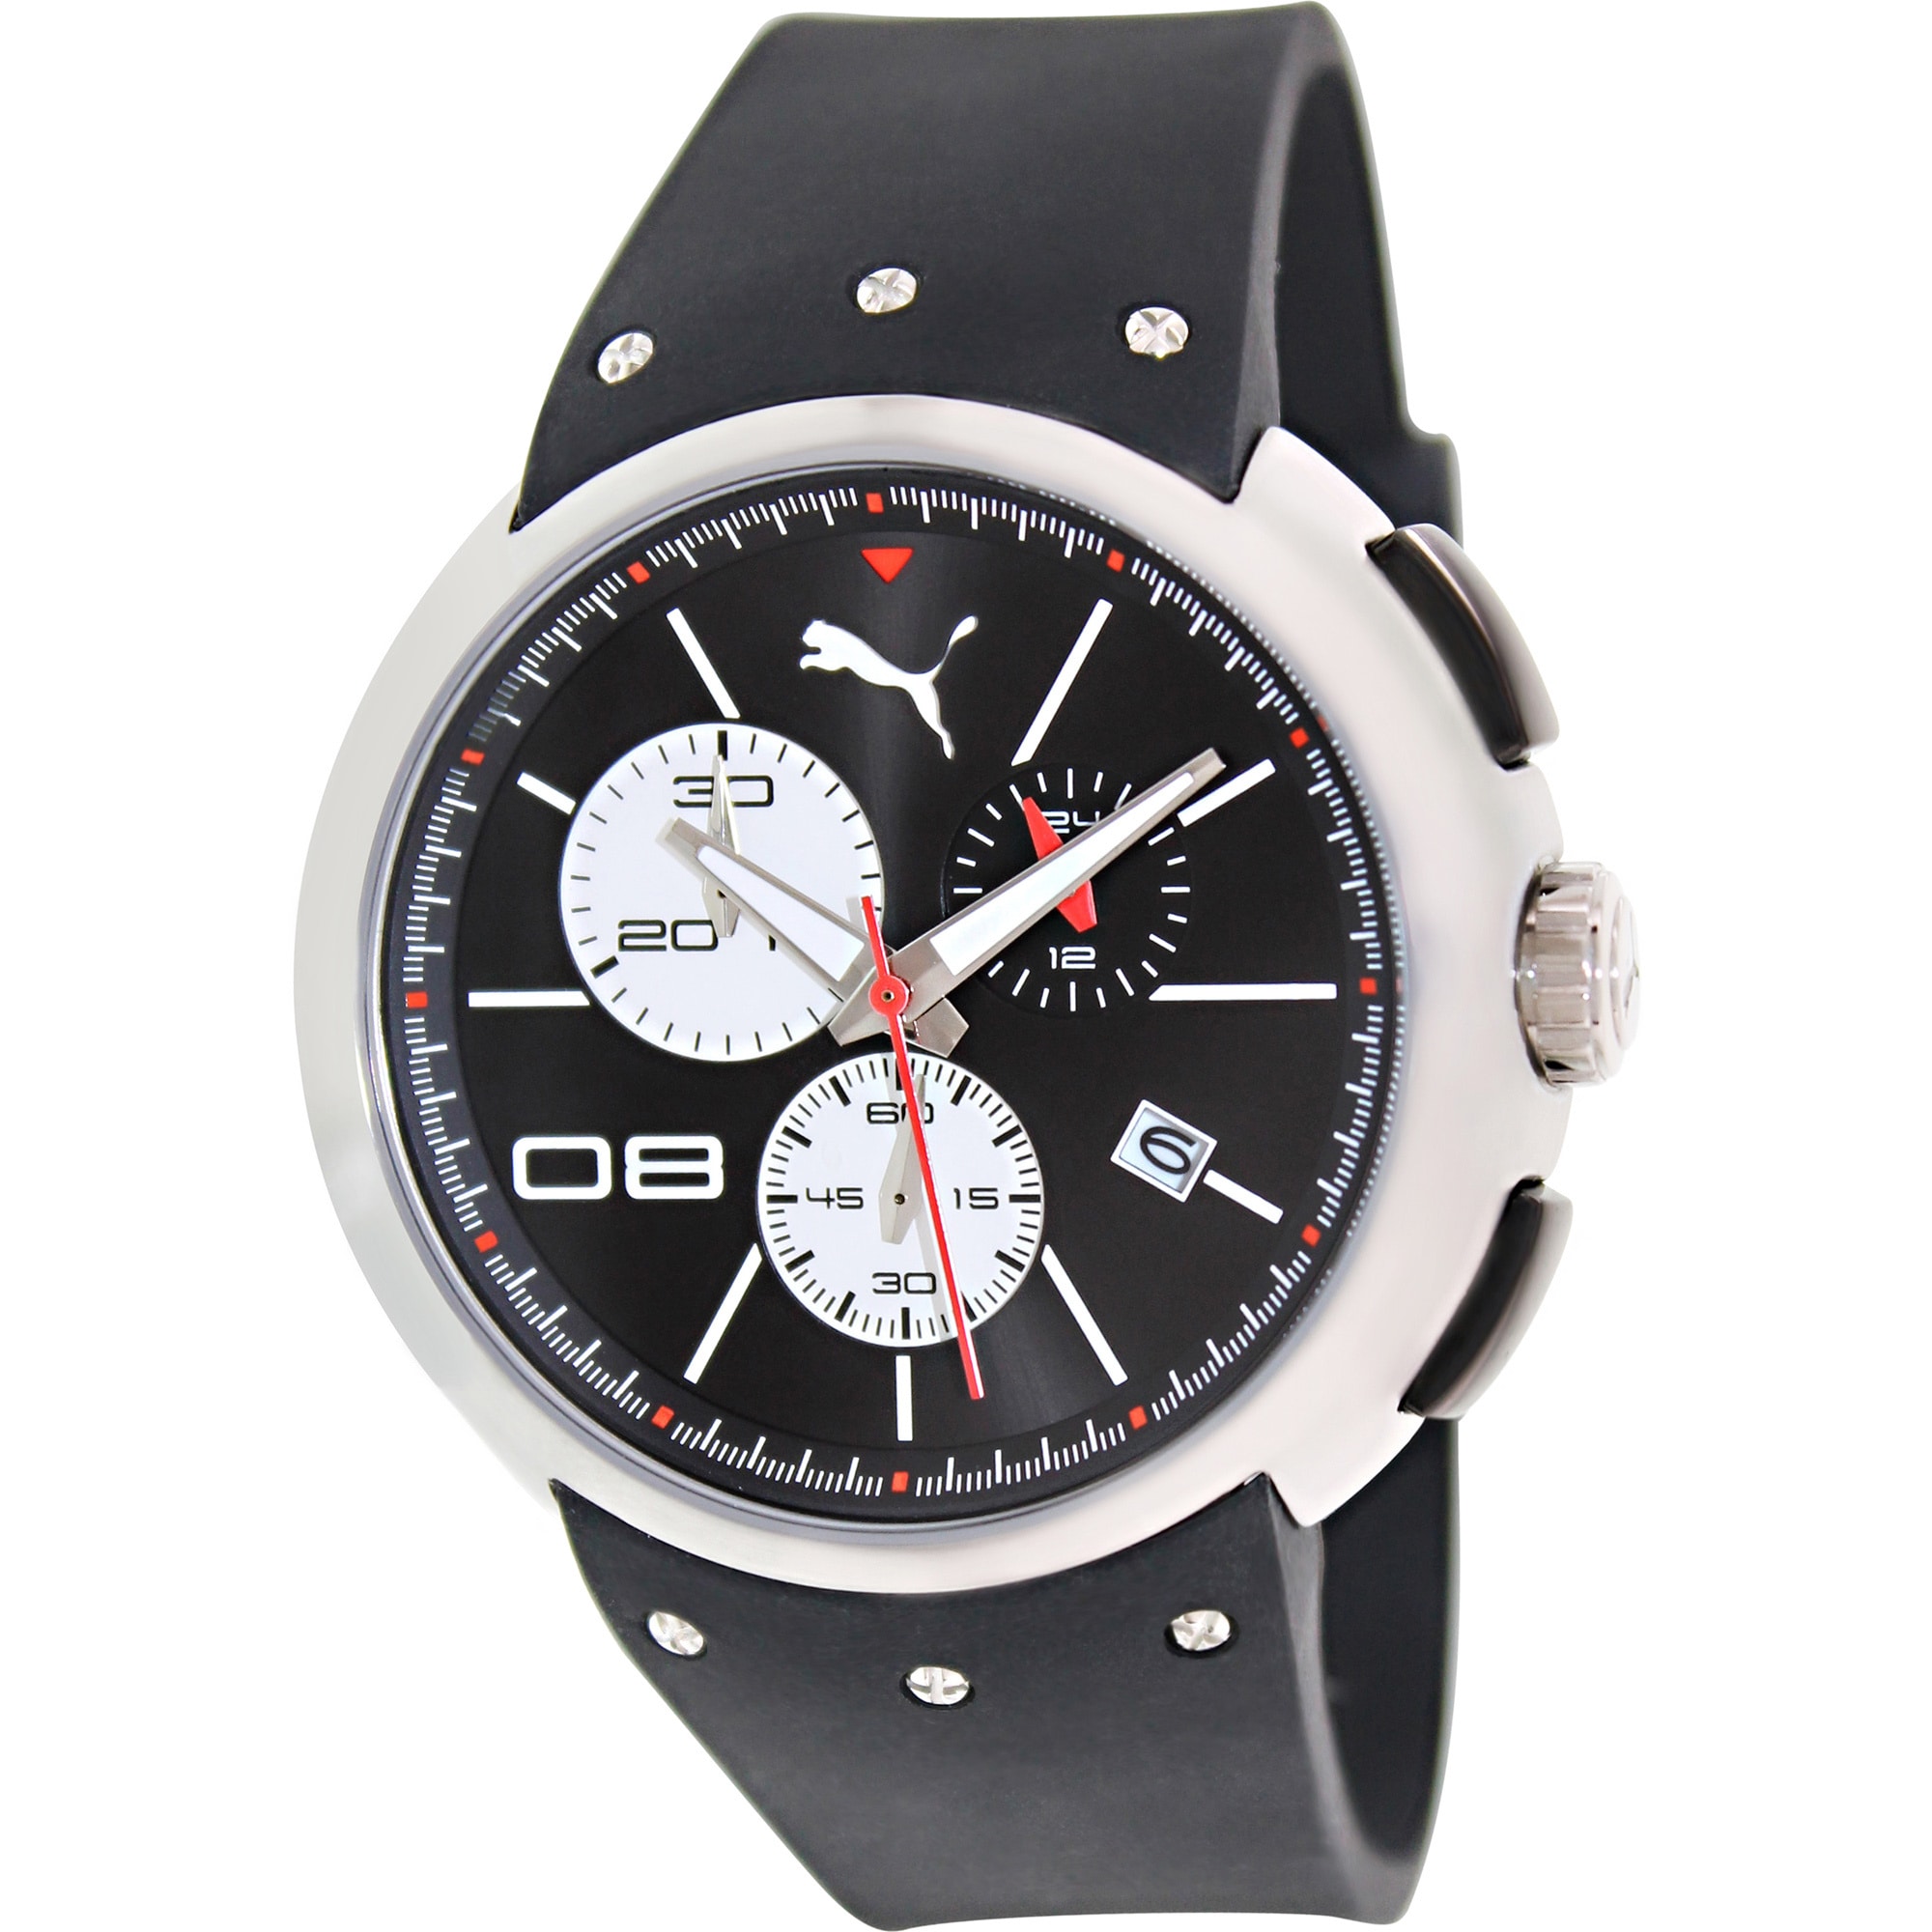 puma stainless steel 805 watch price